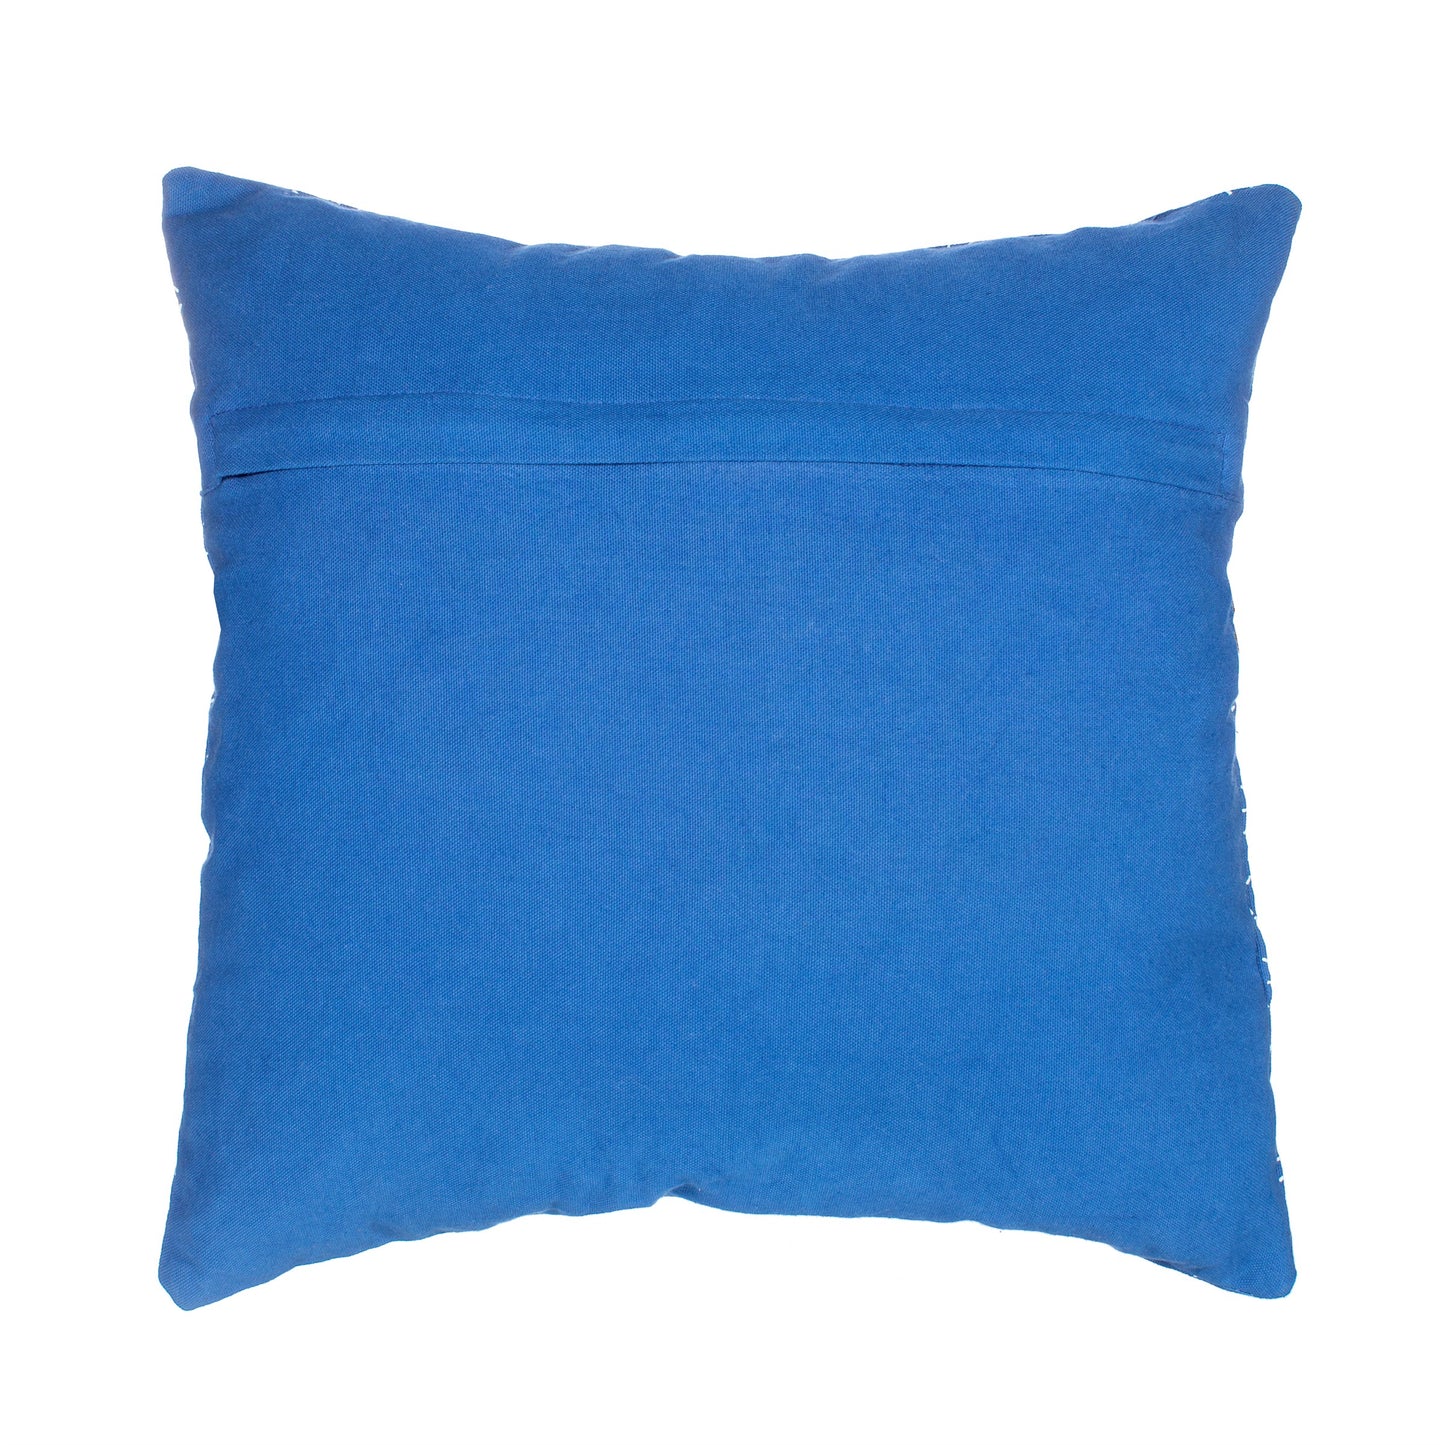 Stitch Print Blue Cushion reverse from Home and Bay